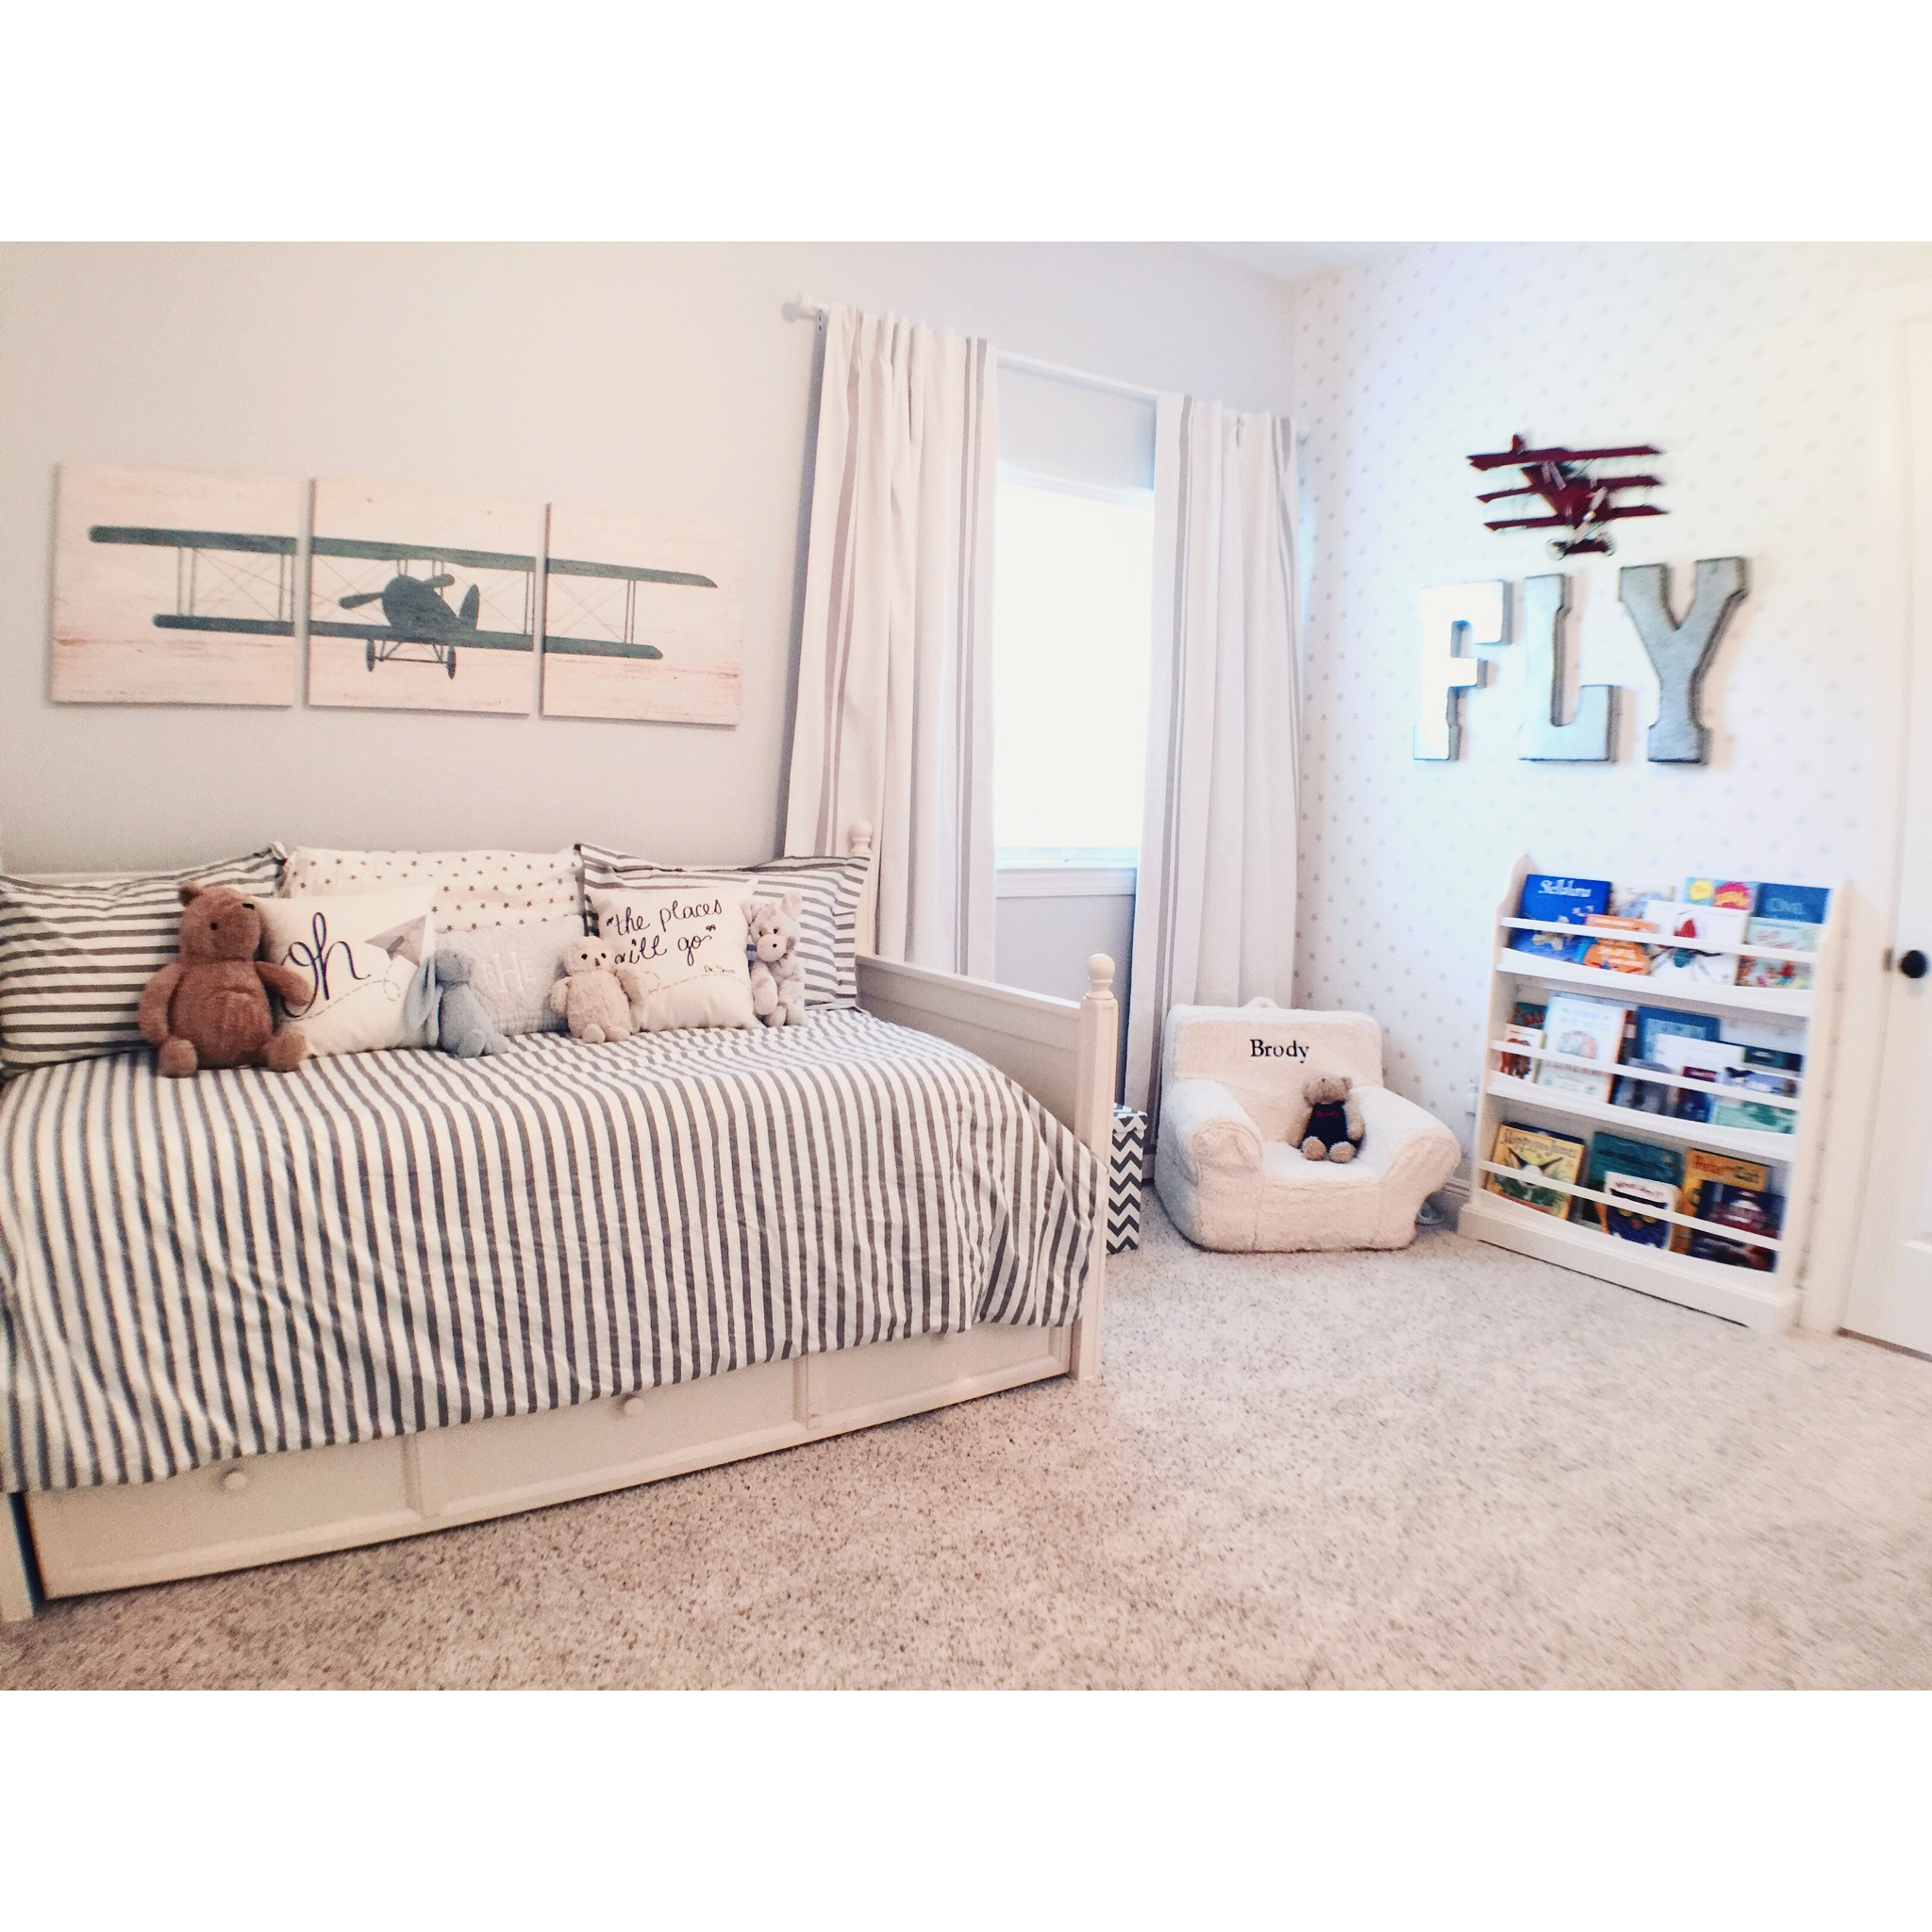 Airplane Decor For Baby Room
 Airplane Themed Toddler Room Project Nursery